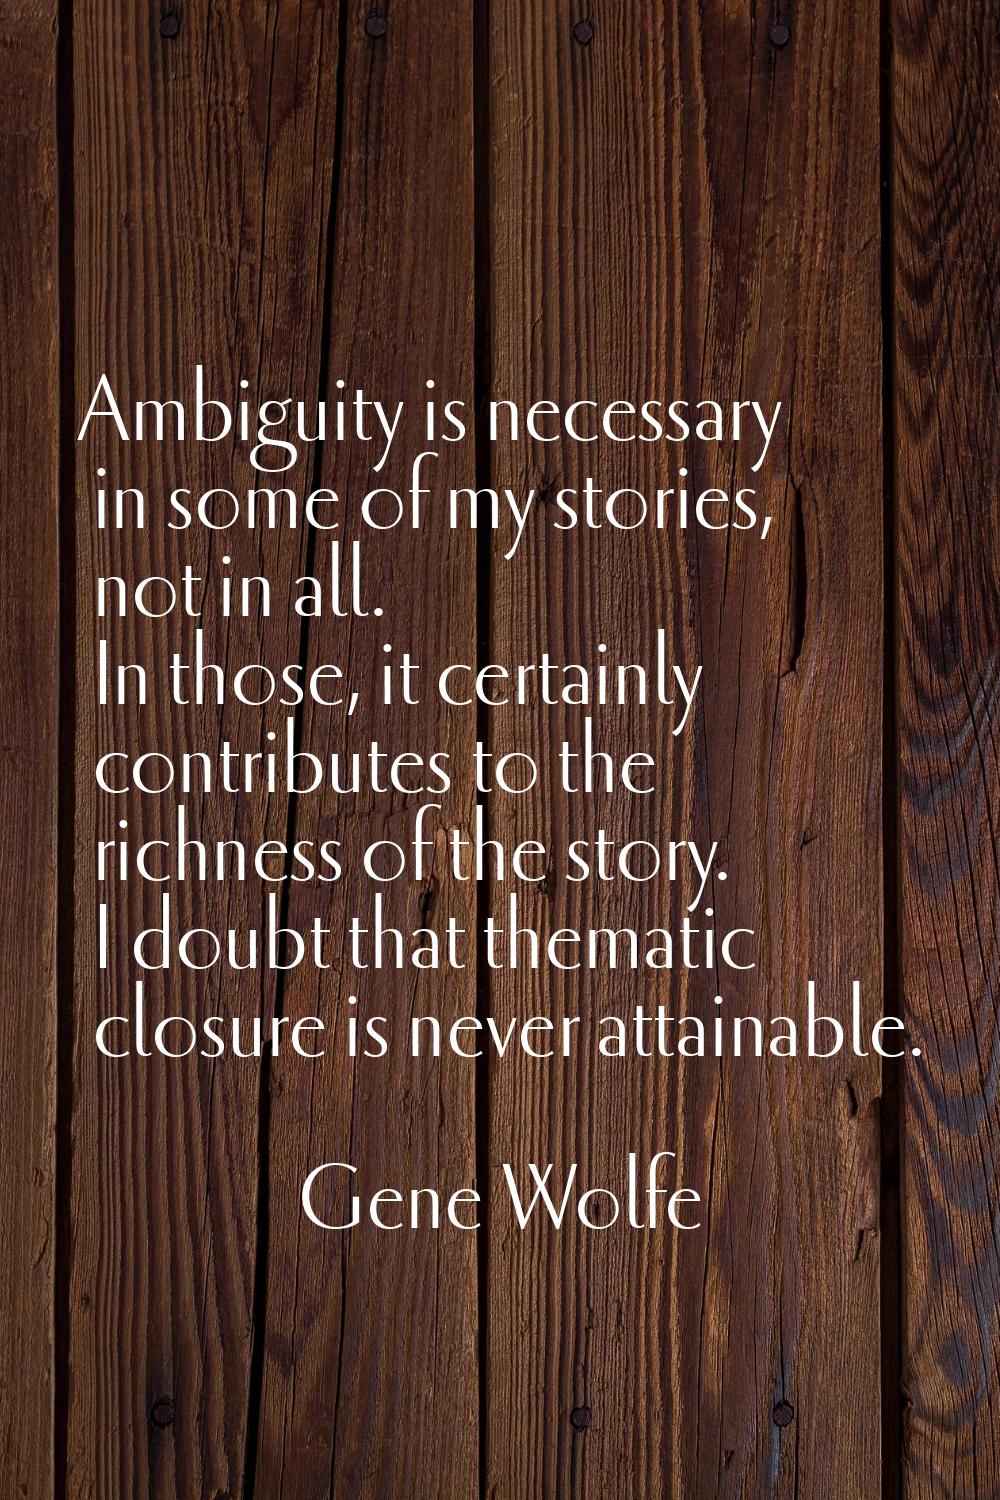 Ambiguity is necessary in some of my stories, not in all. In those, it certainly contributes to the